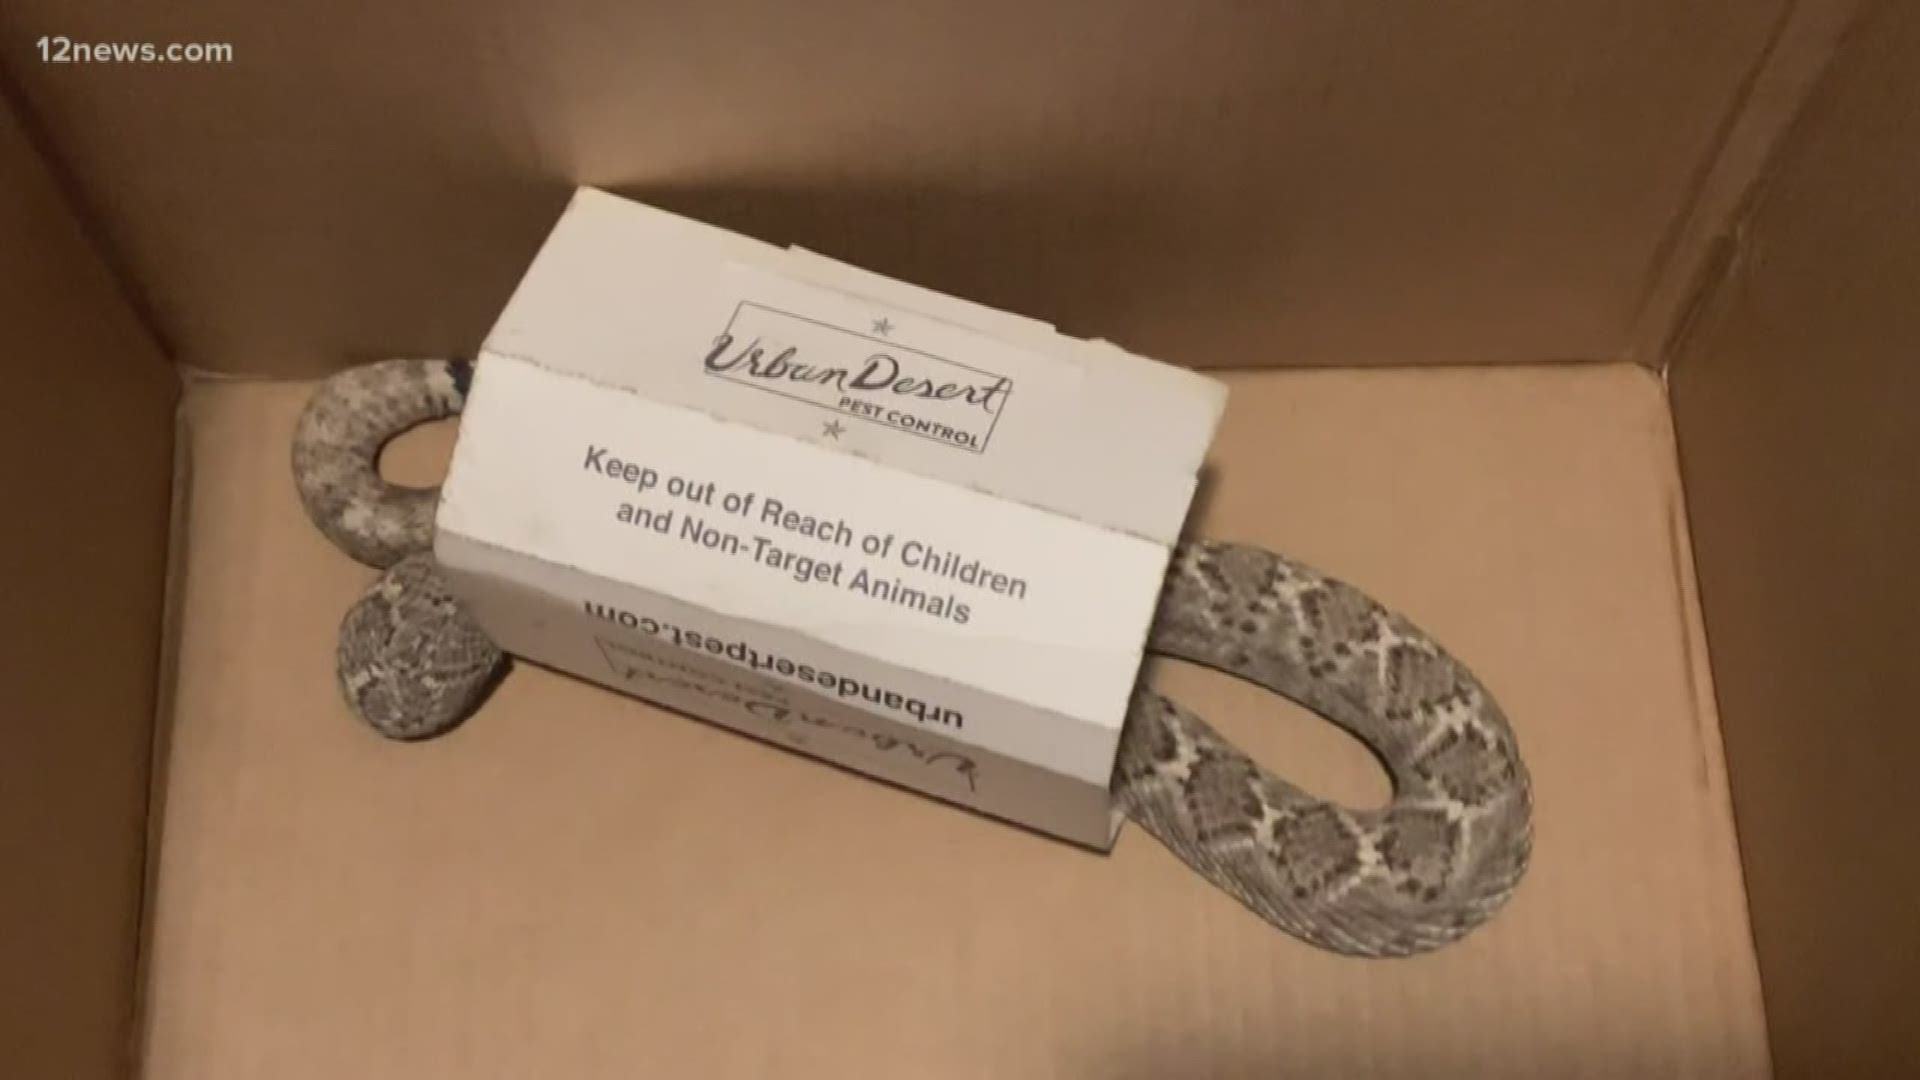 Erin Helm has found two snakes in her Ahwatukee home in the past year. Team 12's Trisha Hendricks has tips for how to deal with this problem.